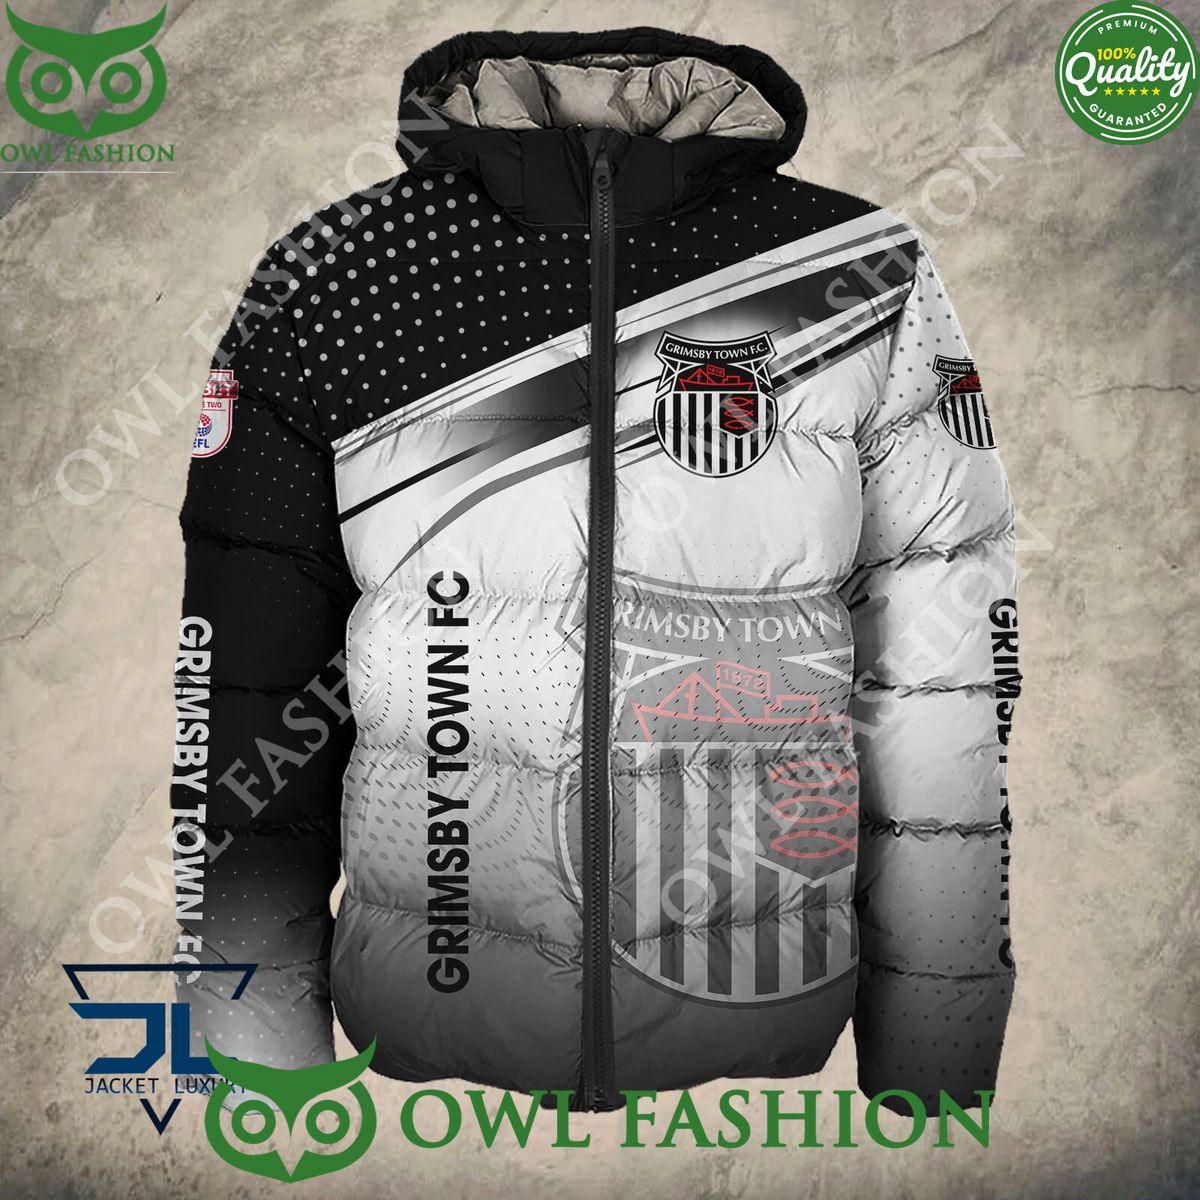 Grimsby Town FC EFL League Two Hoodie Shirt I like your dress, it is amazing